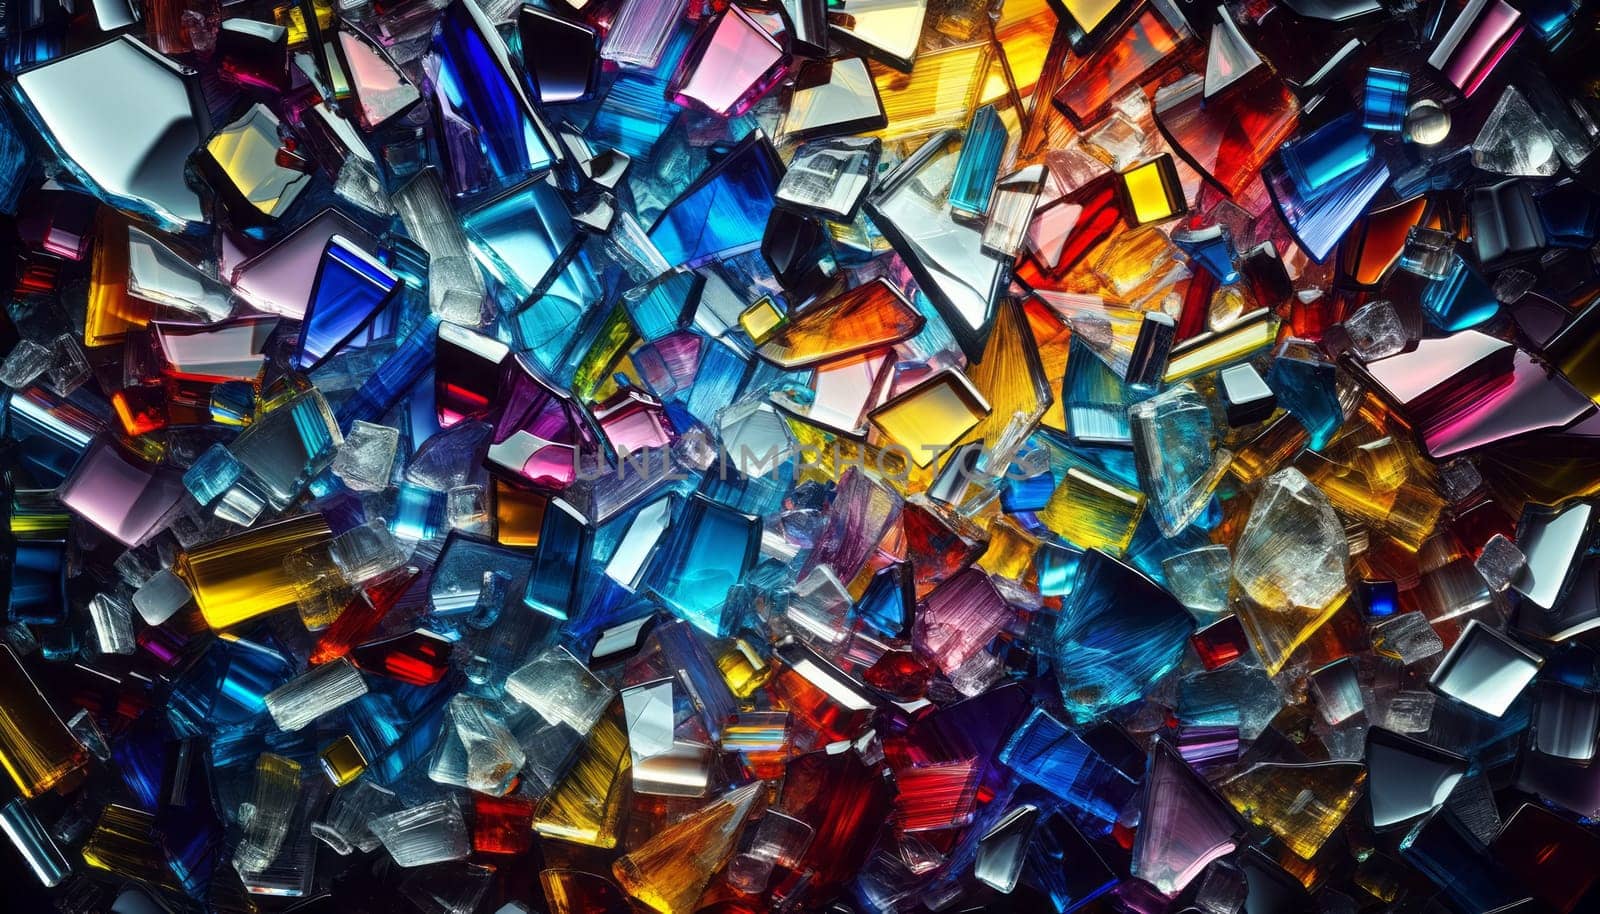 A close-up photography of shattered colored glass pieces. The glass shards display a wide array of colors including blues, reds, purples, yellows, and greens with sharp edges and varying opacity. Light reflects and refracts through the irregular shapes, creating a mosaic of bright and dark areas, and enhancing the colors to appear luminous. The overall composition resembles a chaotic yet beautiful abstract art piece, with the different angles of the pieces contributing to a dynamic texture.